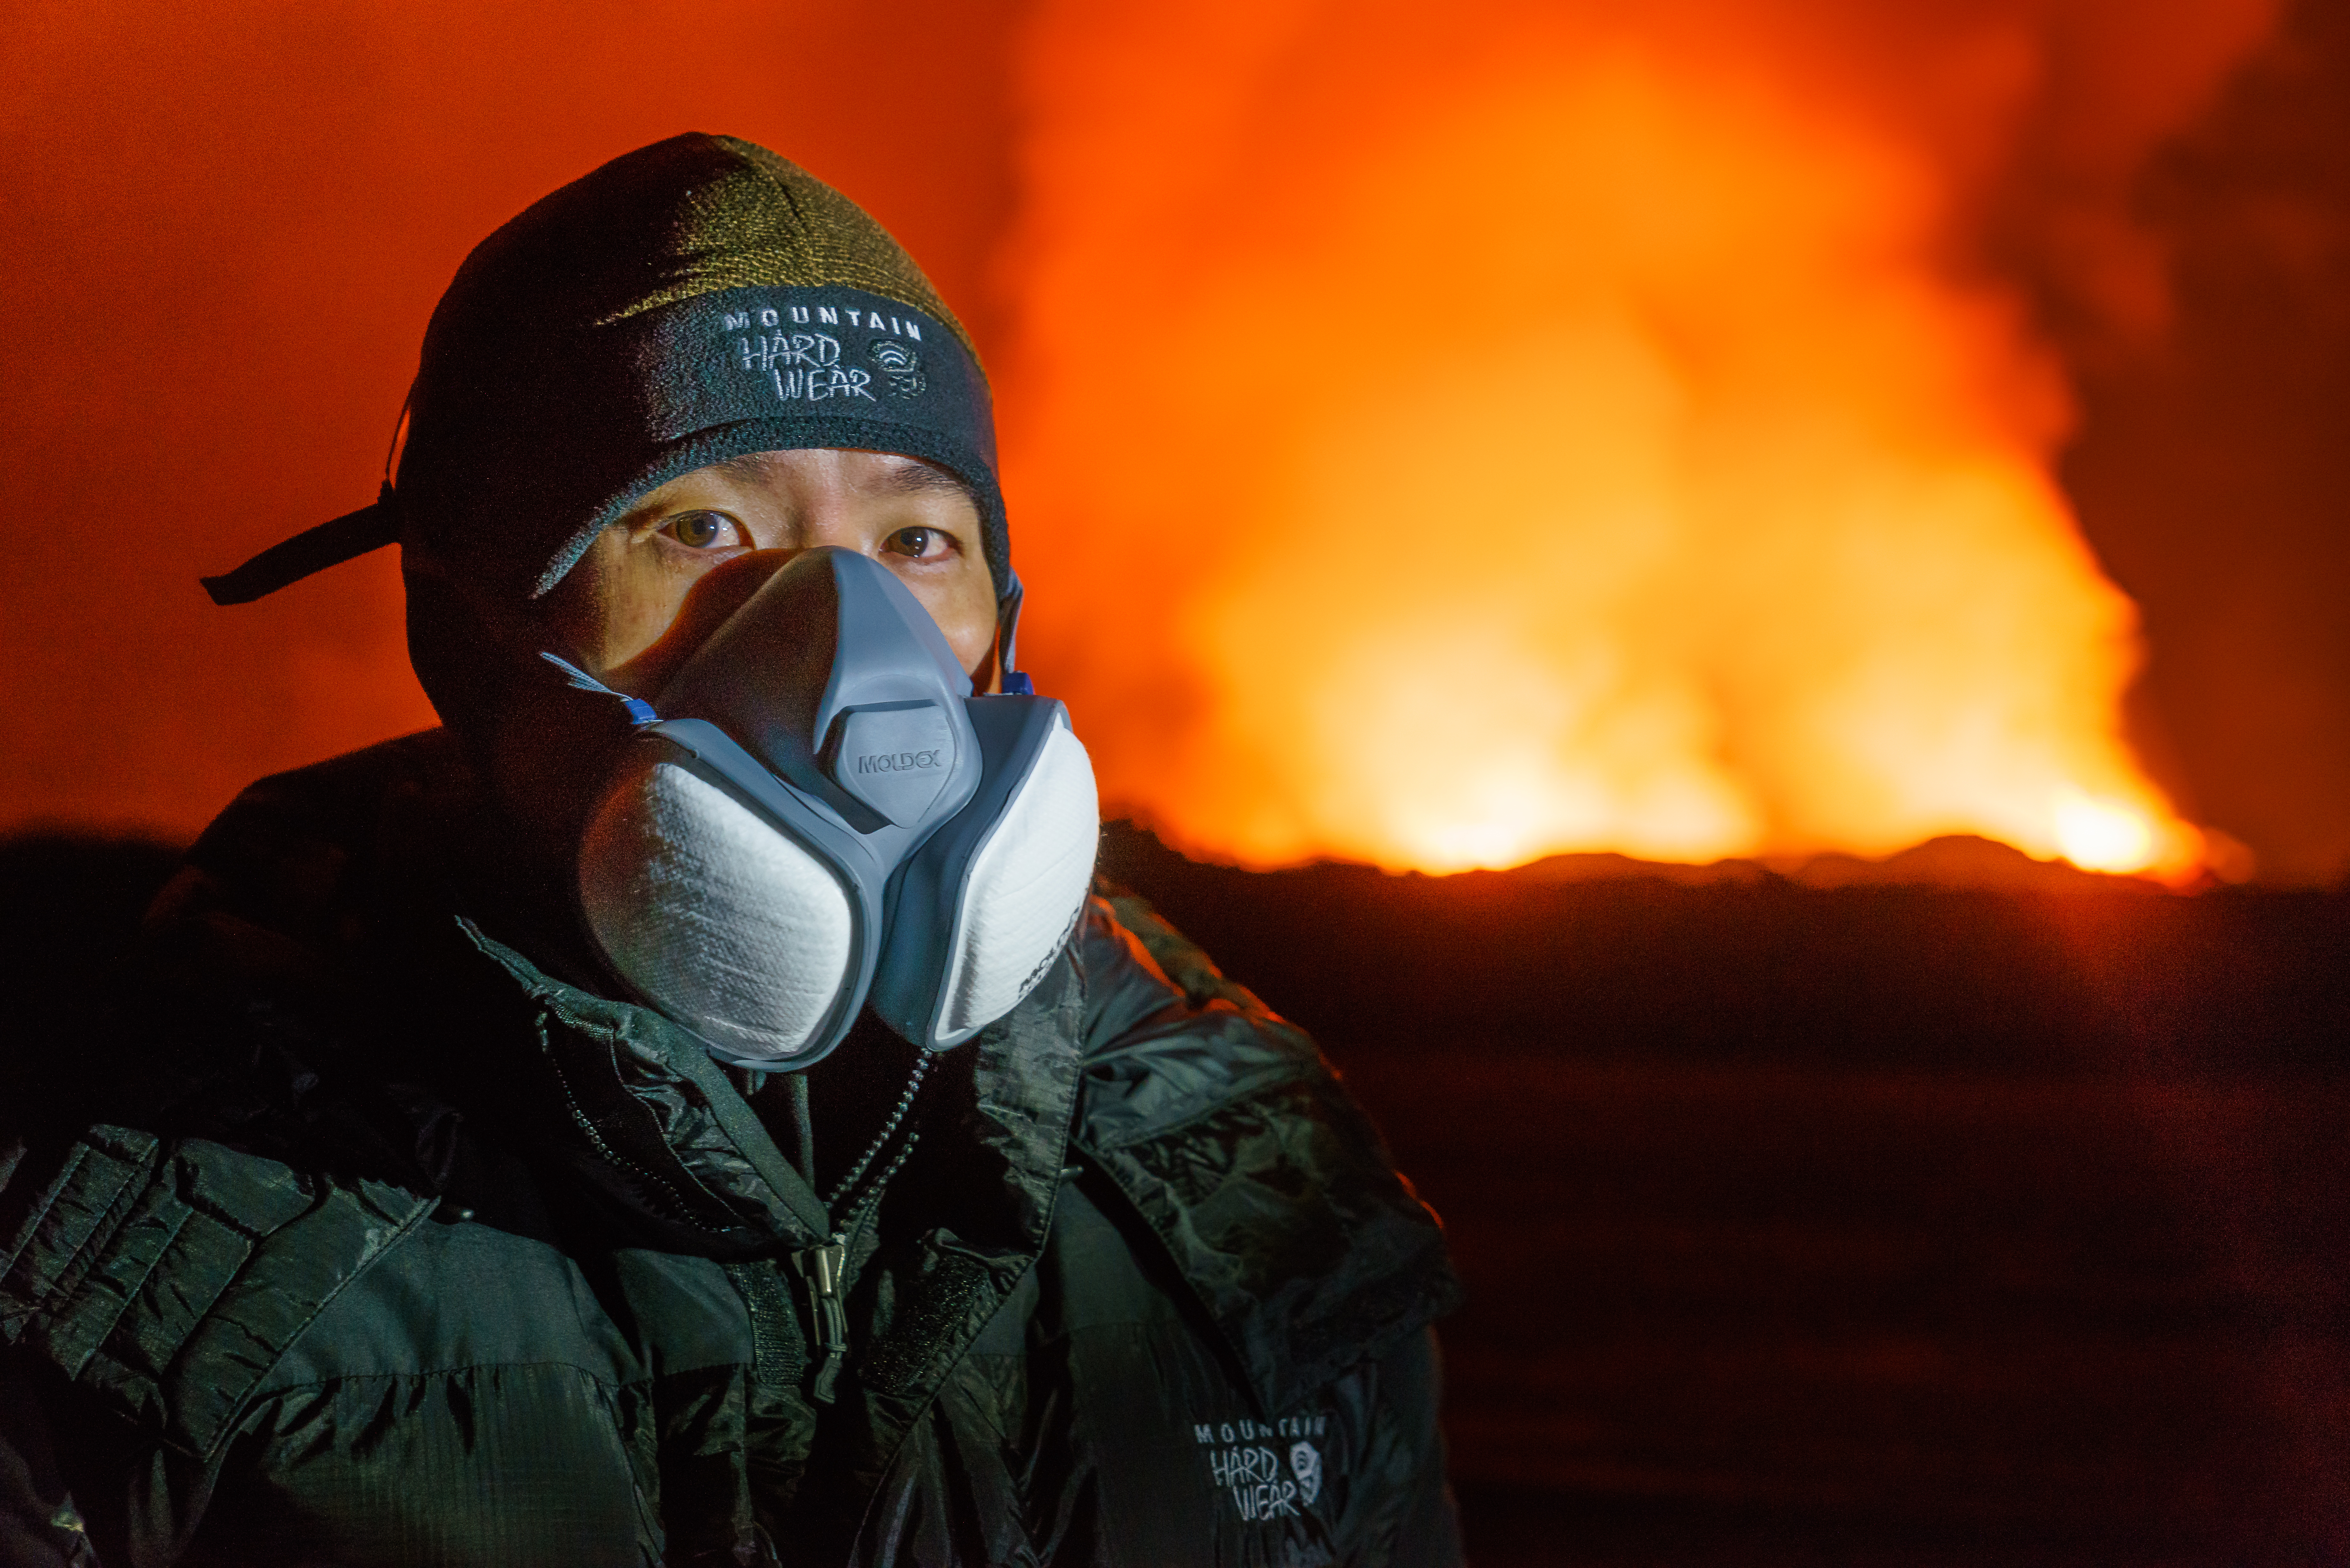 Eric Cheng at the Holuhraun volcano eruption in Iceland in September 2014.